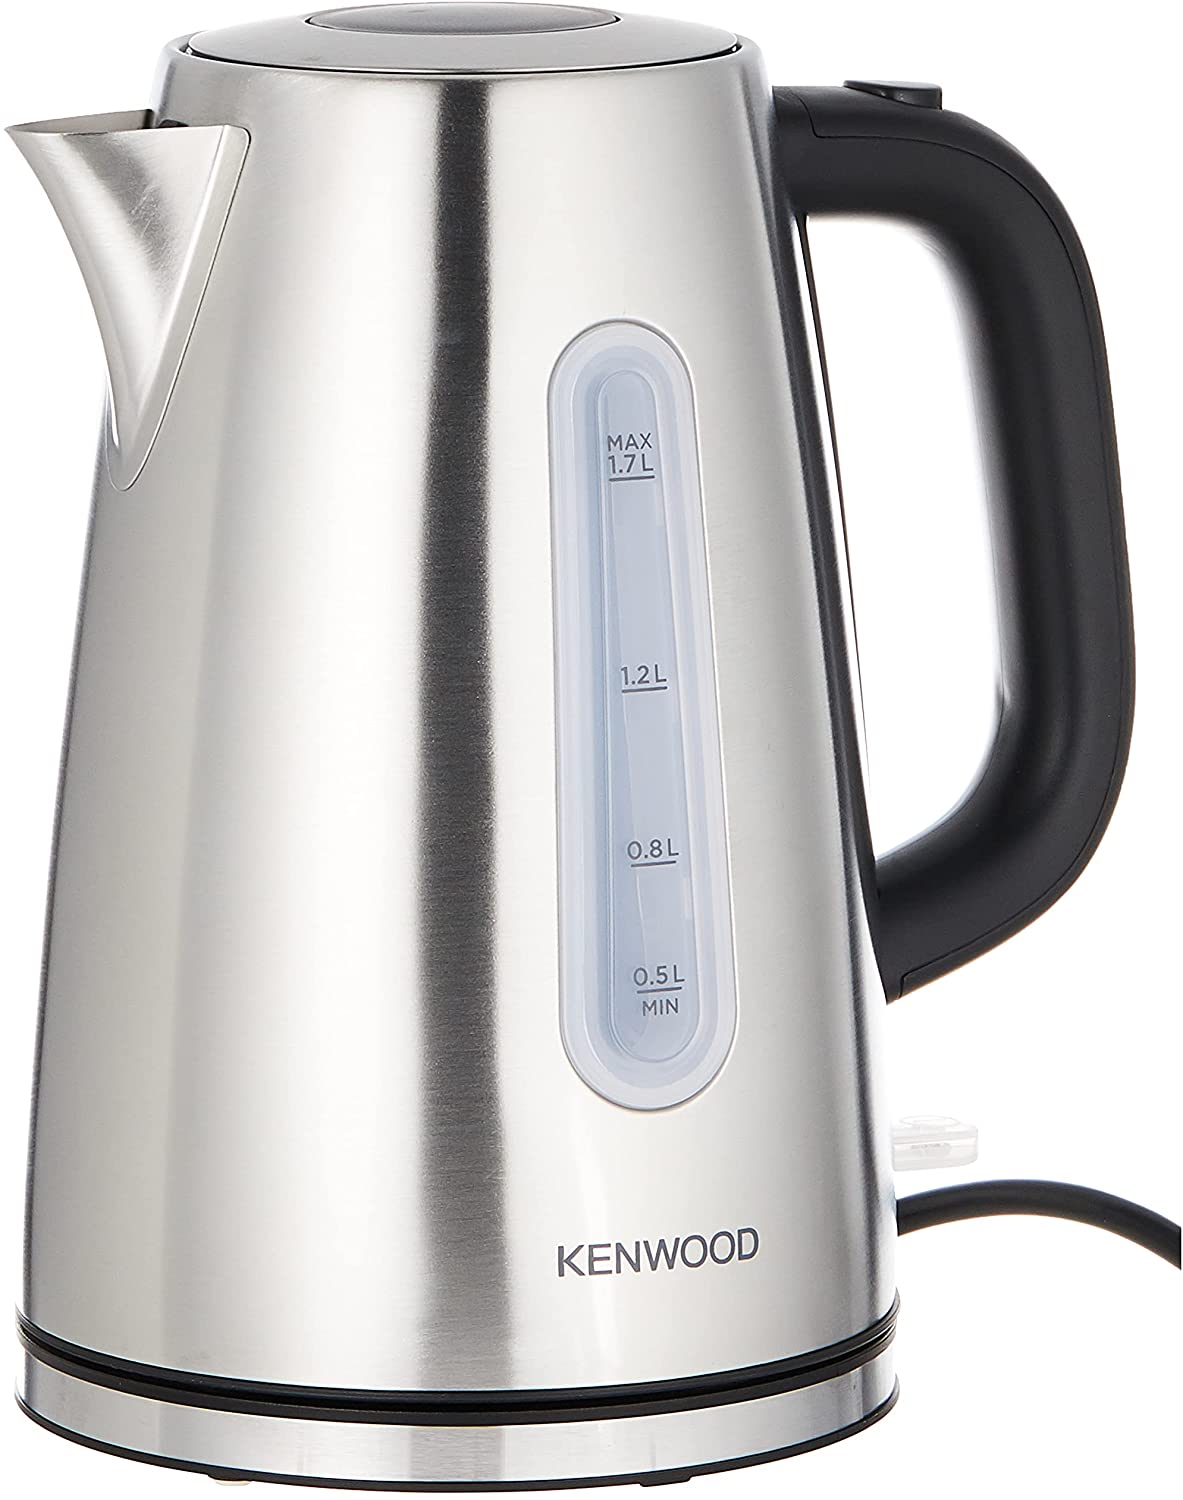 Grille pain KENWOOD Persona TOG800CL - infinytech-reunion